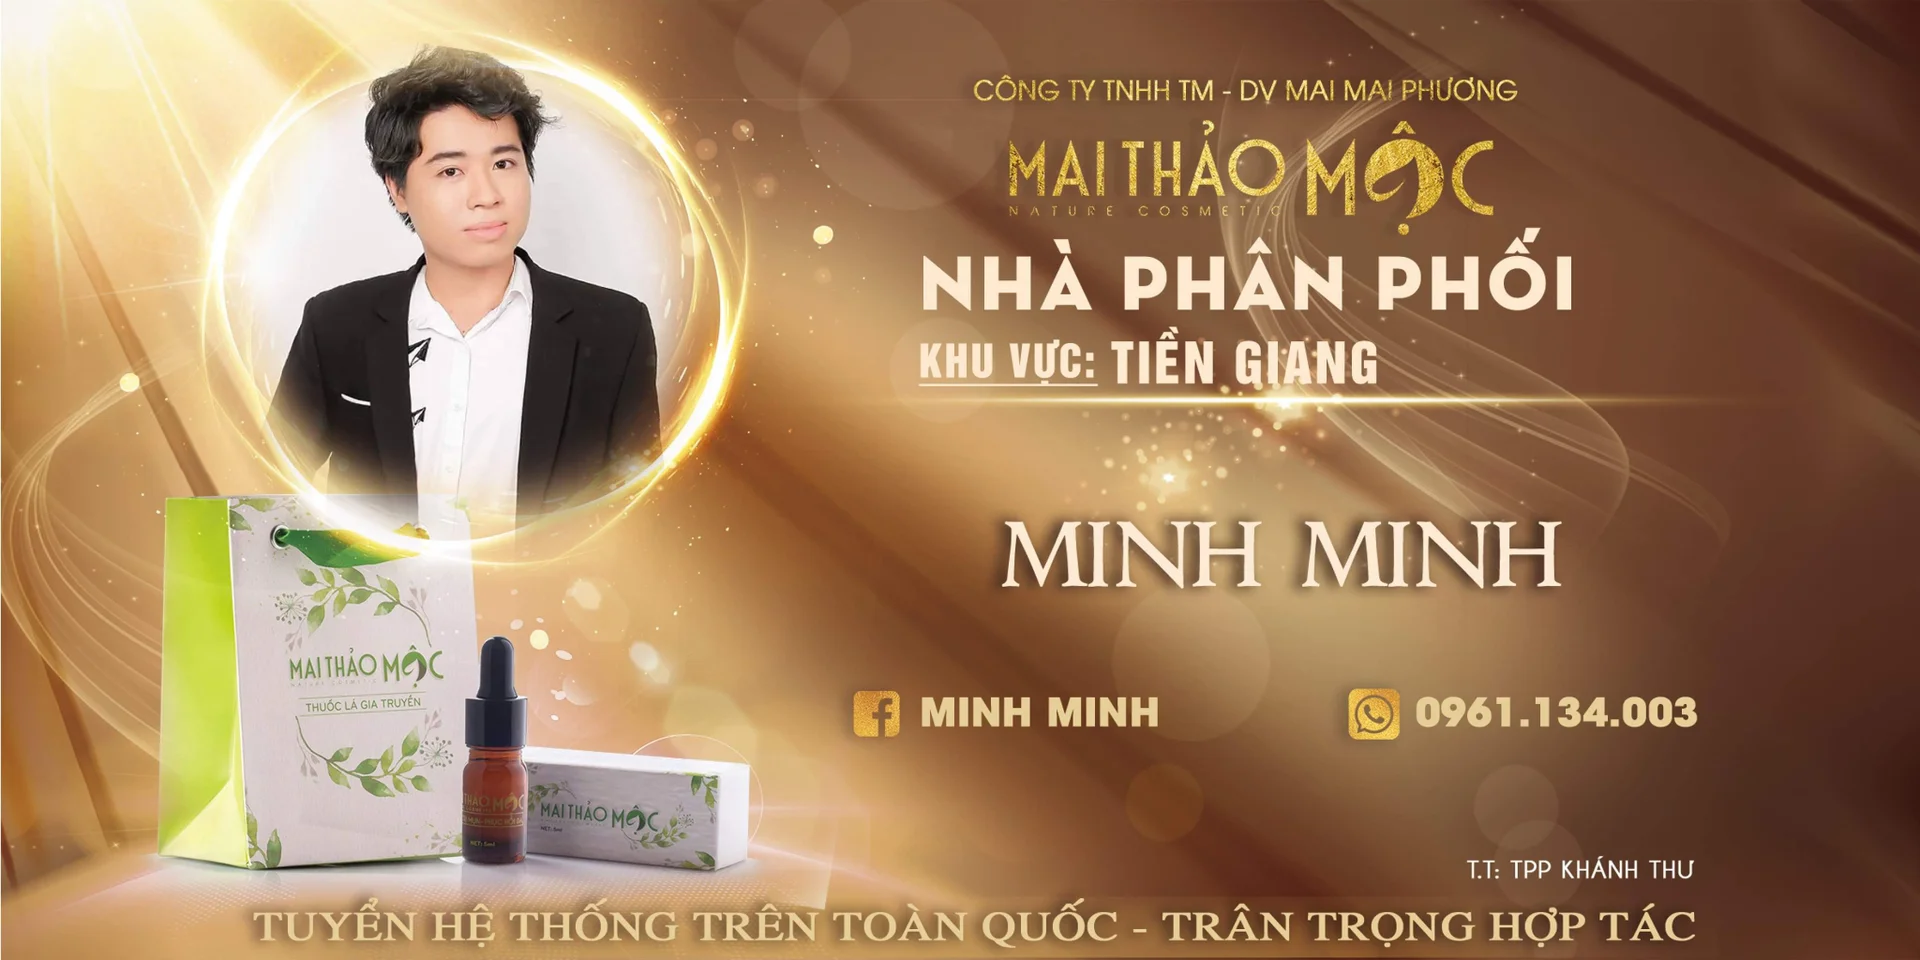 Minh Minh's cover photo